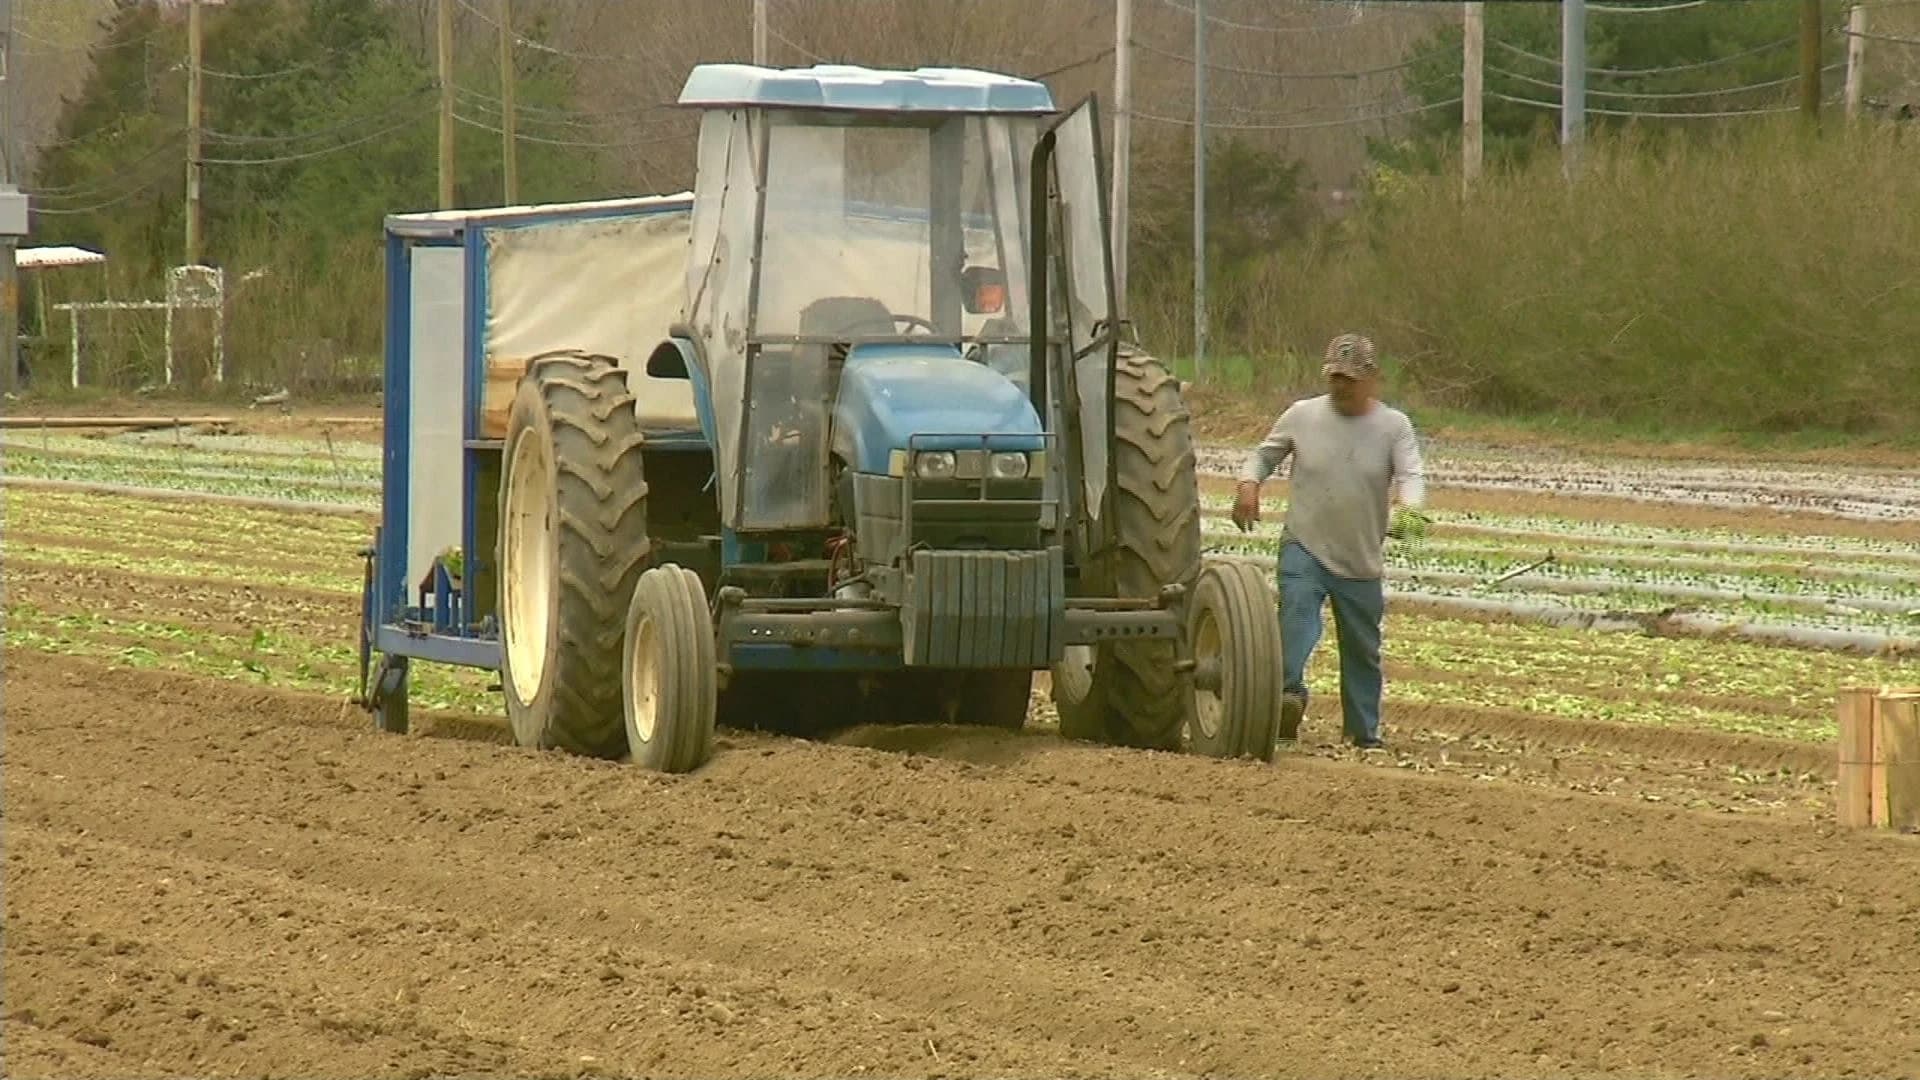 East End farmers express concern over immigrant labor